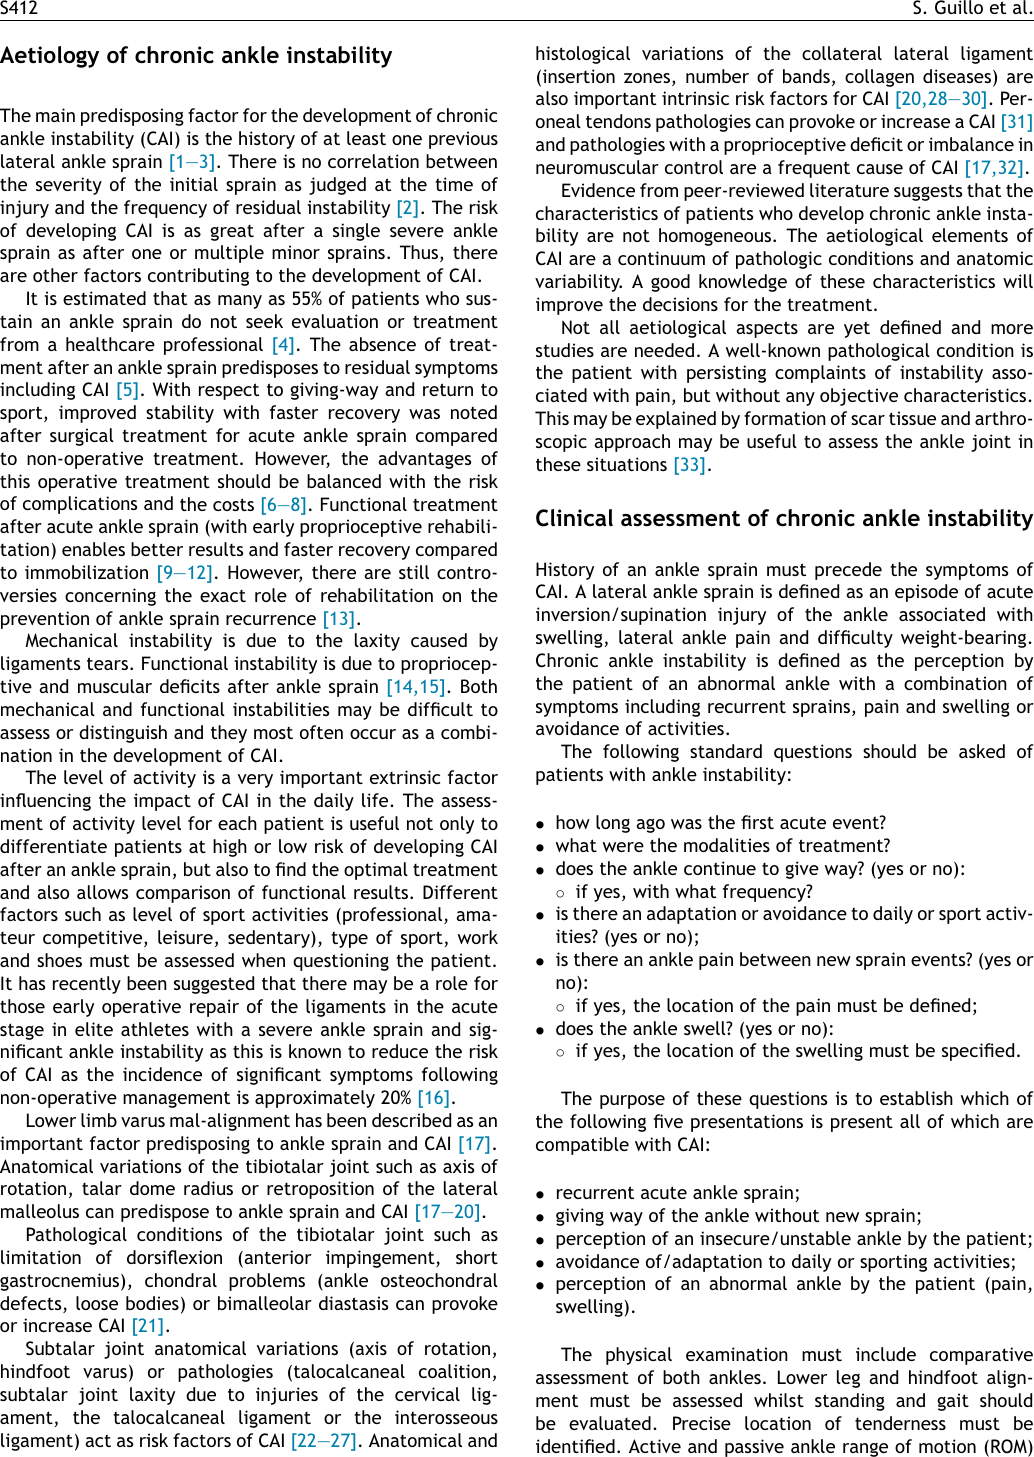 Page 2 of 9 - Consensus In Chronic Ankle Instability  OTSR CAI 20131